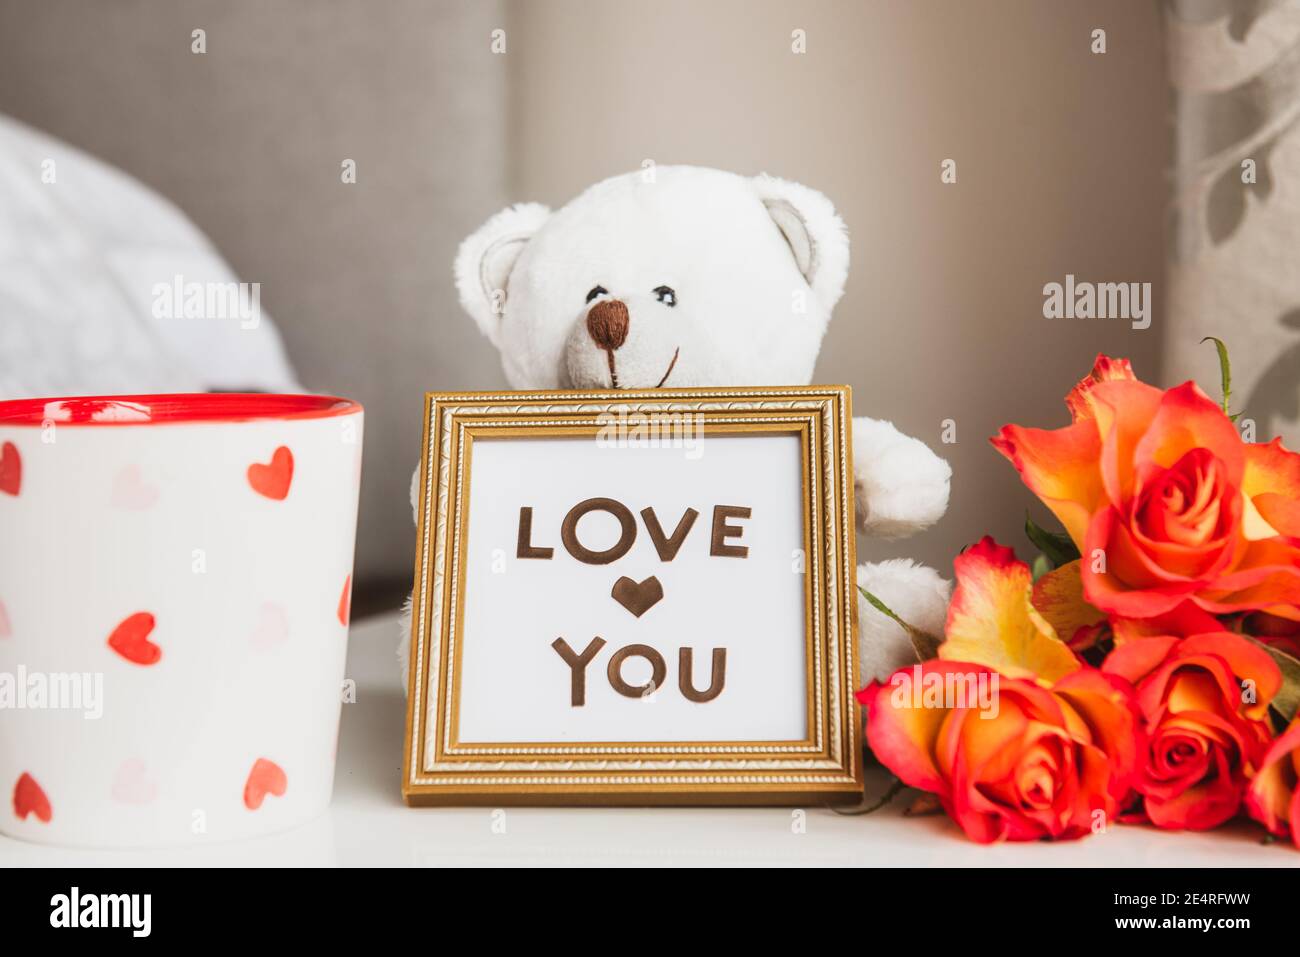 Teddy Bear in 'I Love You' Coffee Cup, Valentine's Day Gift